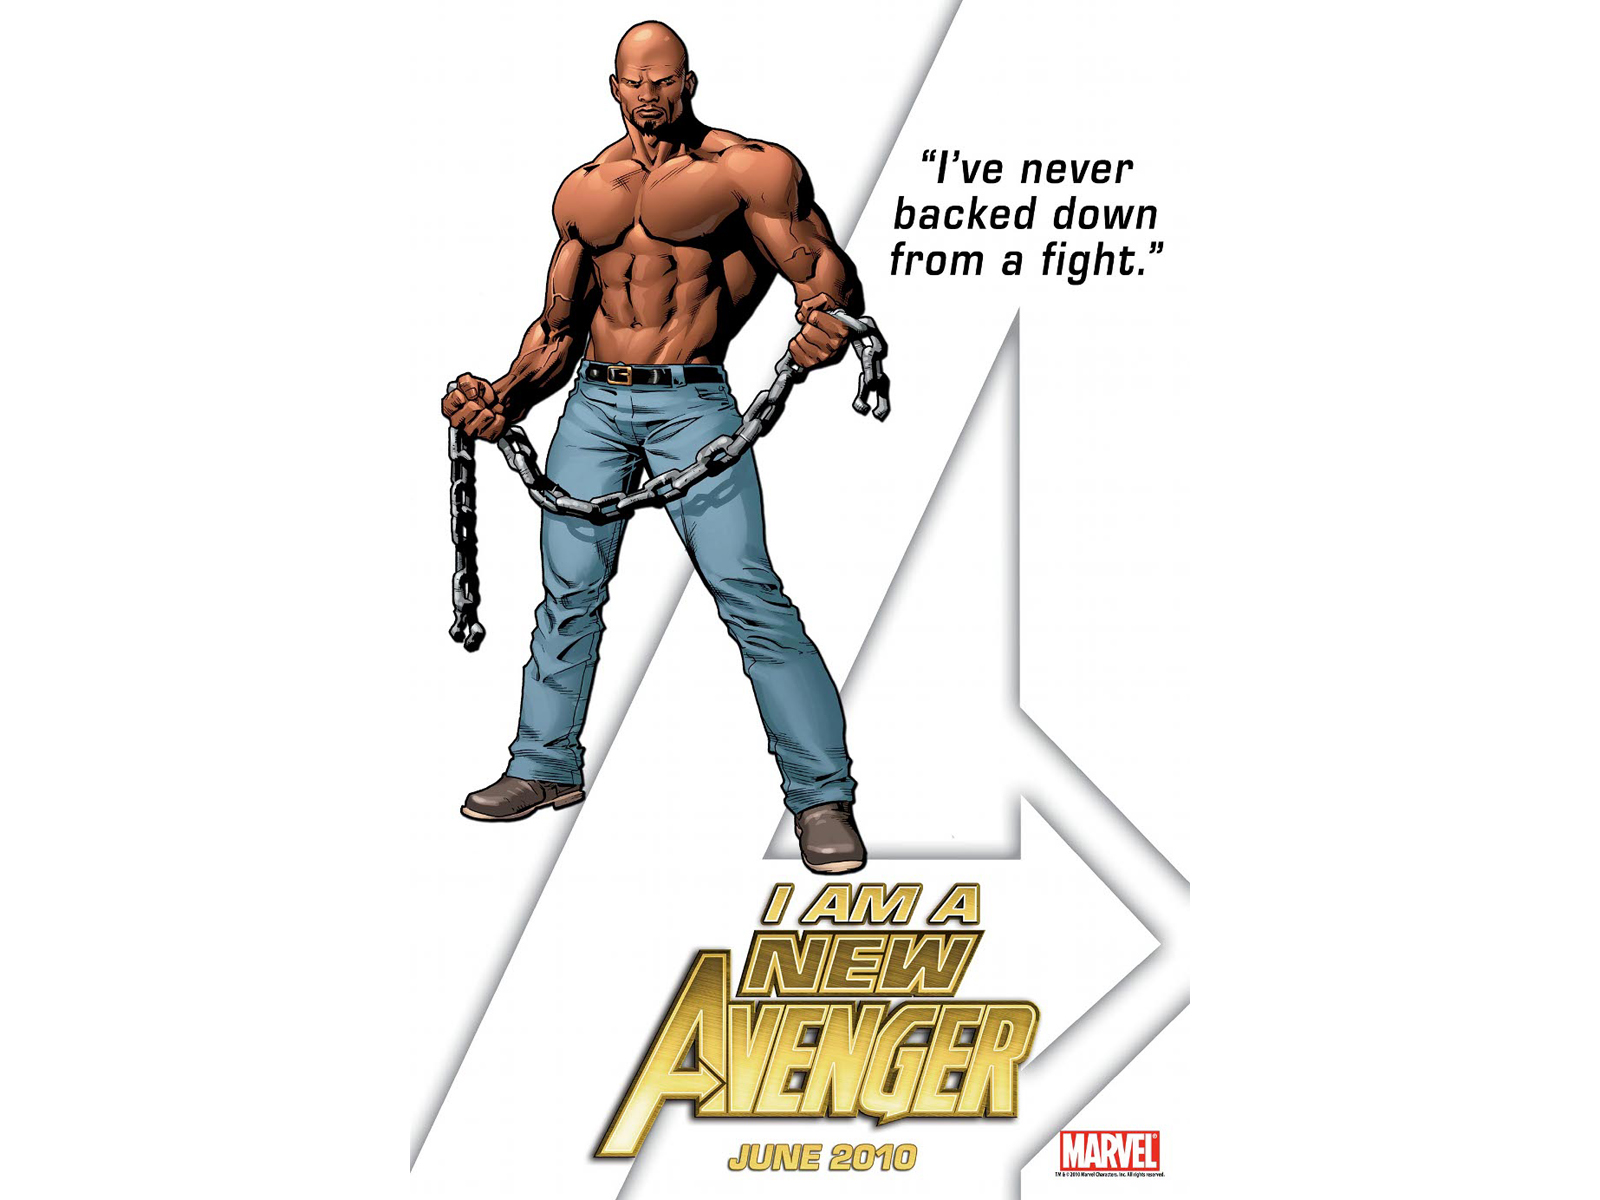 Luke Cage in a powerful pose, representing the character's strength and resilience.